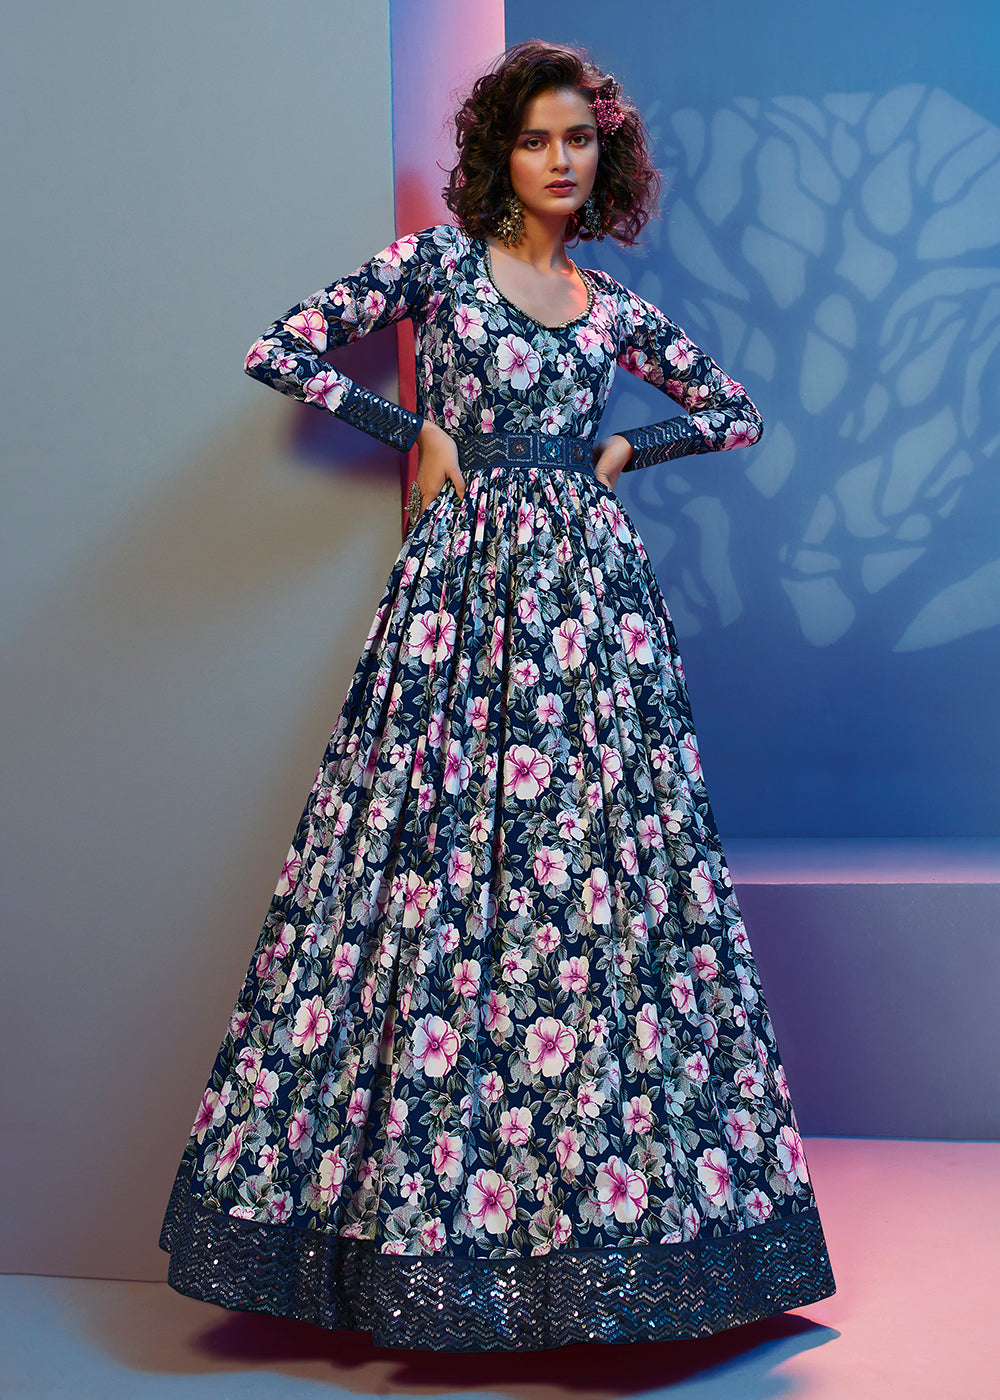 Buy Now Floral Printed Glorious Blue Crepe Wedding Festive Party Gown Online in USA, UK, Australia, New Zealand, Canada & Worldwide at Empress Clothing. 